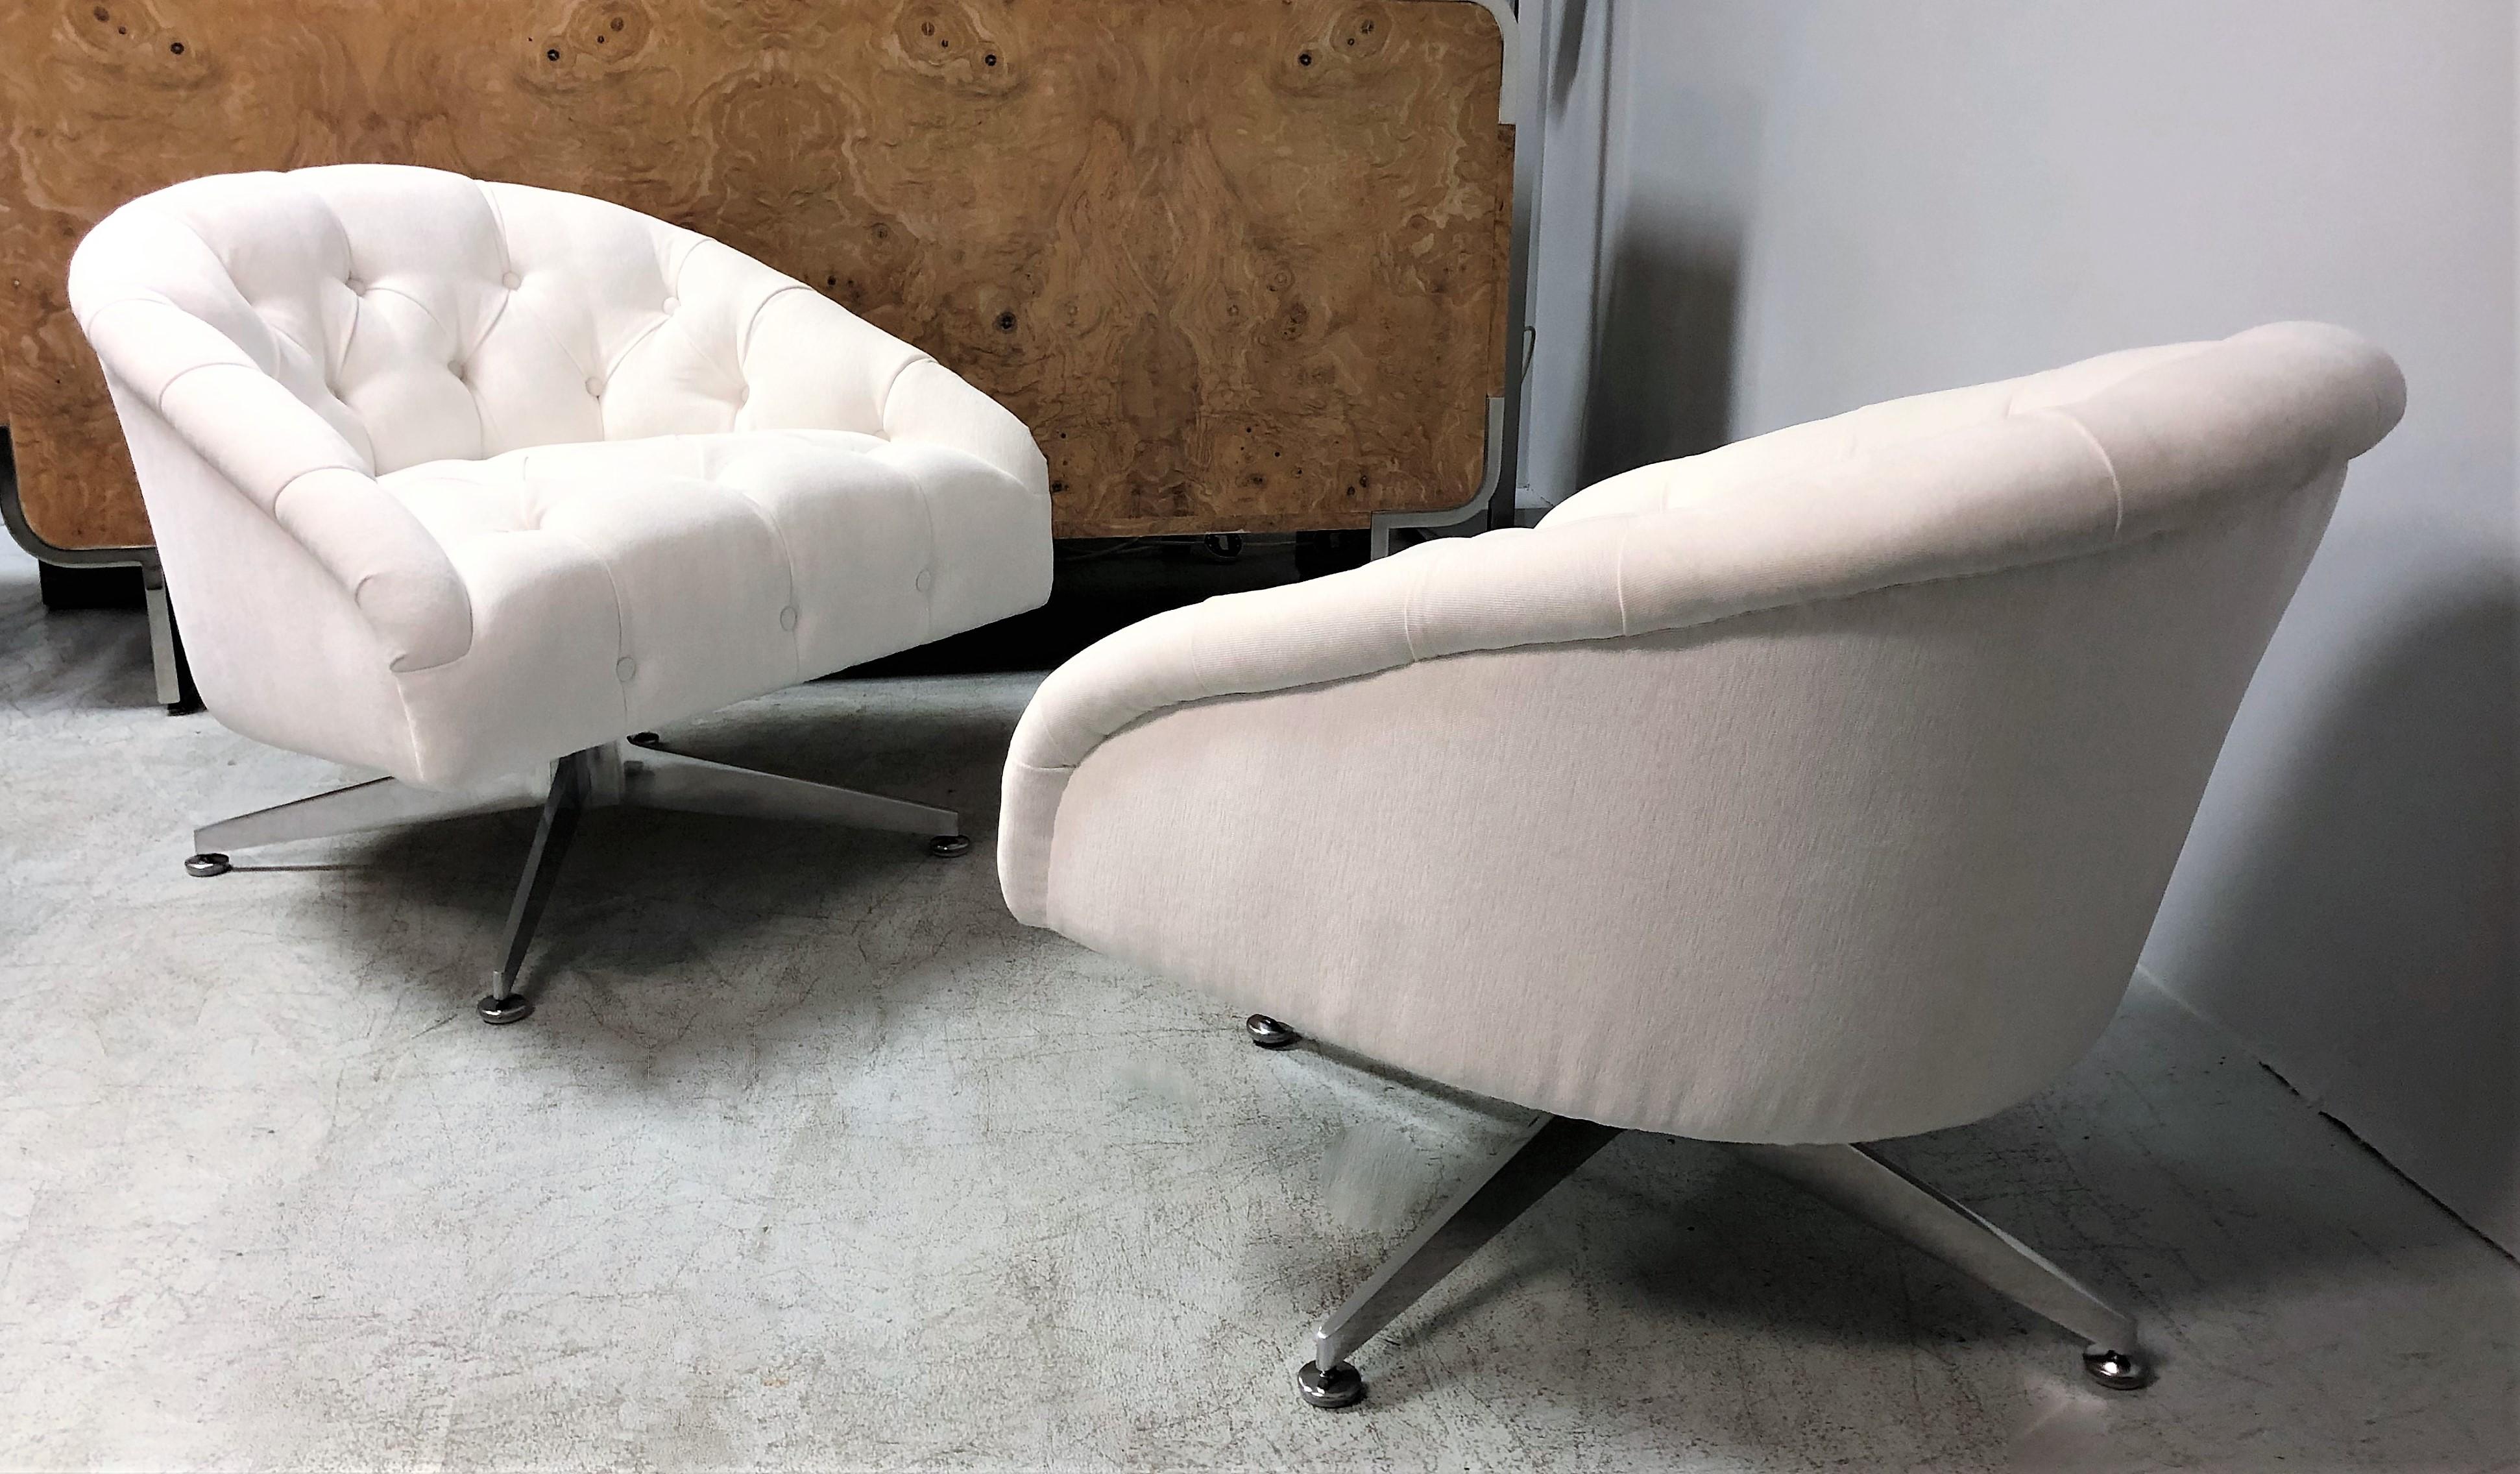 A pair of swivel chairs design by Ward Bennett and edited by Lehigh Leopold. They have a low modernist profile and an provocative inviting presence. The bases are a highlight of this design, solid thick gracefully robust aluminum that extend at a